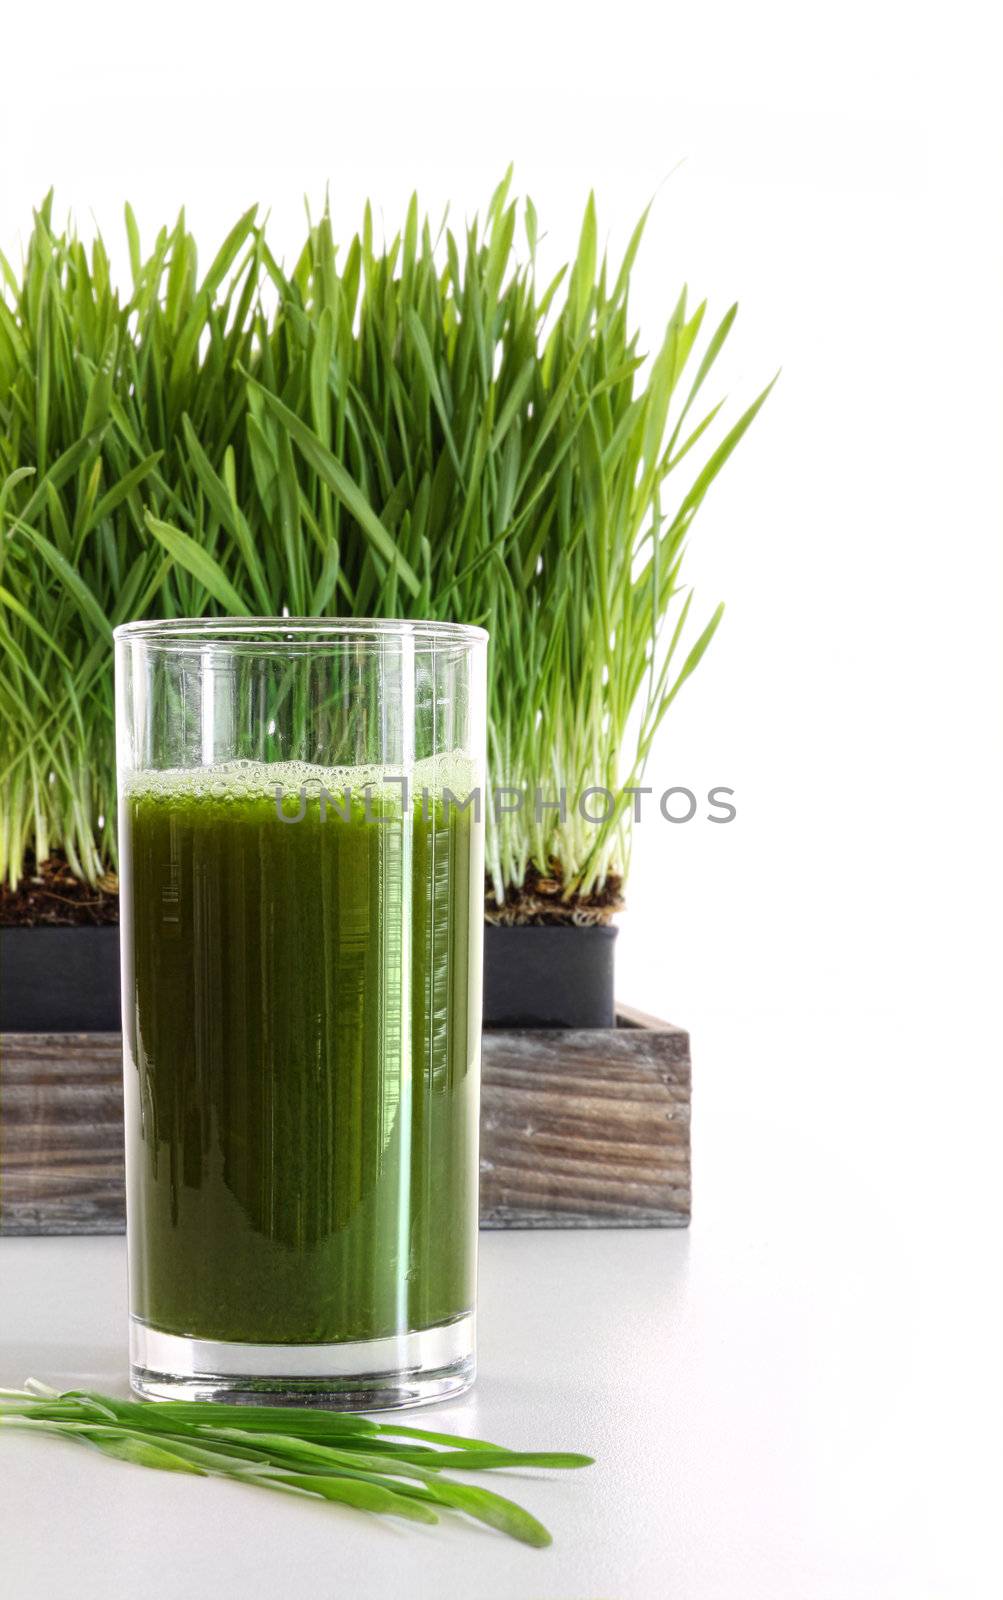 Glass of wheatgrass on white  by Sandralise